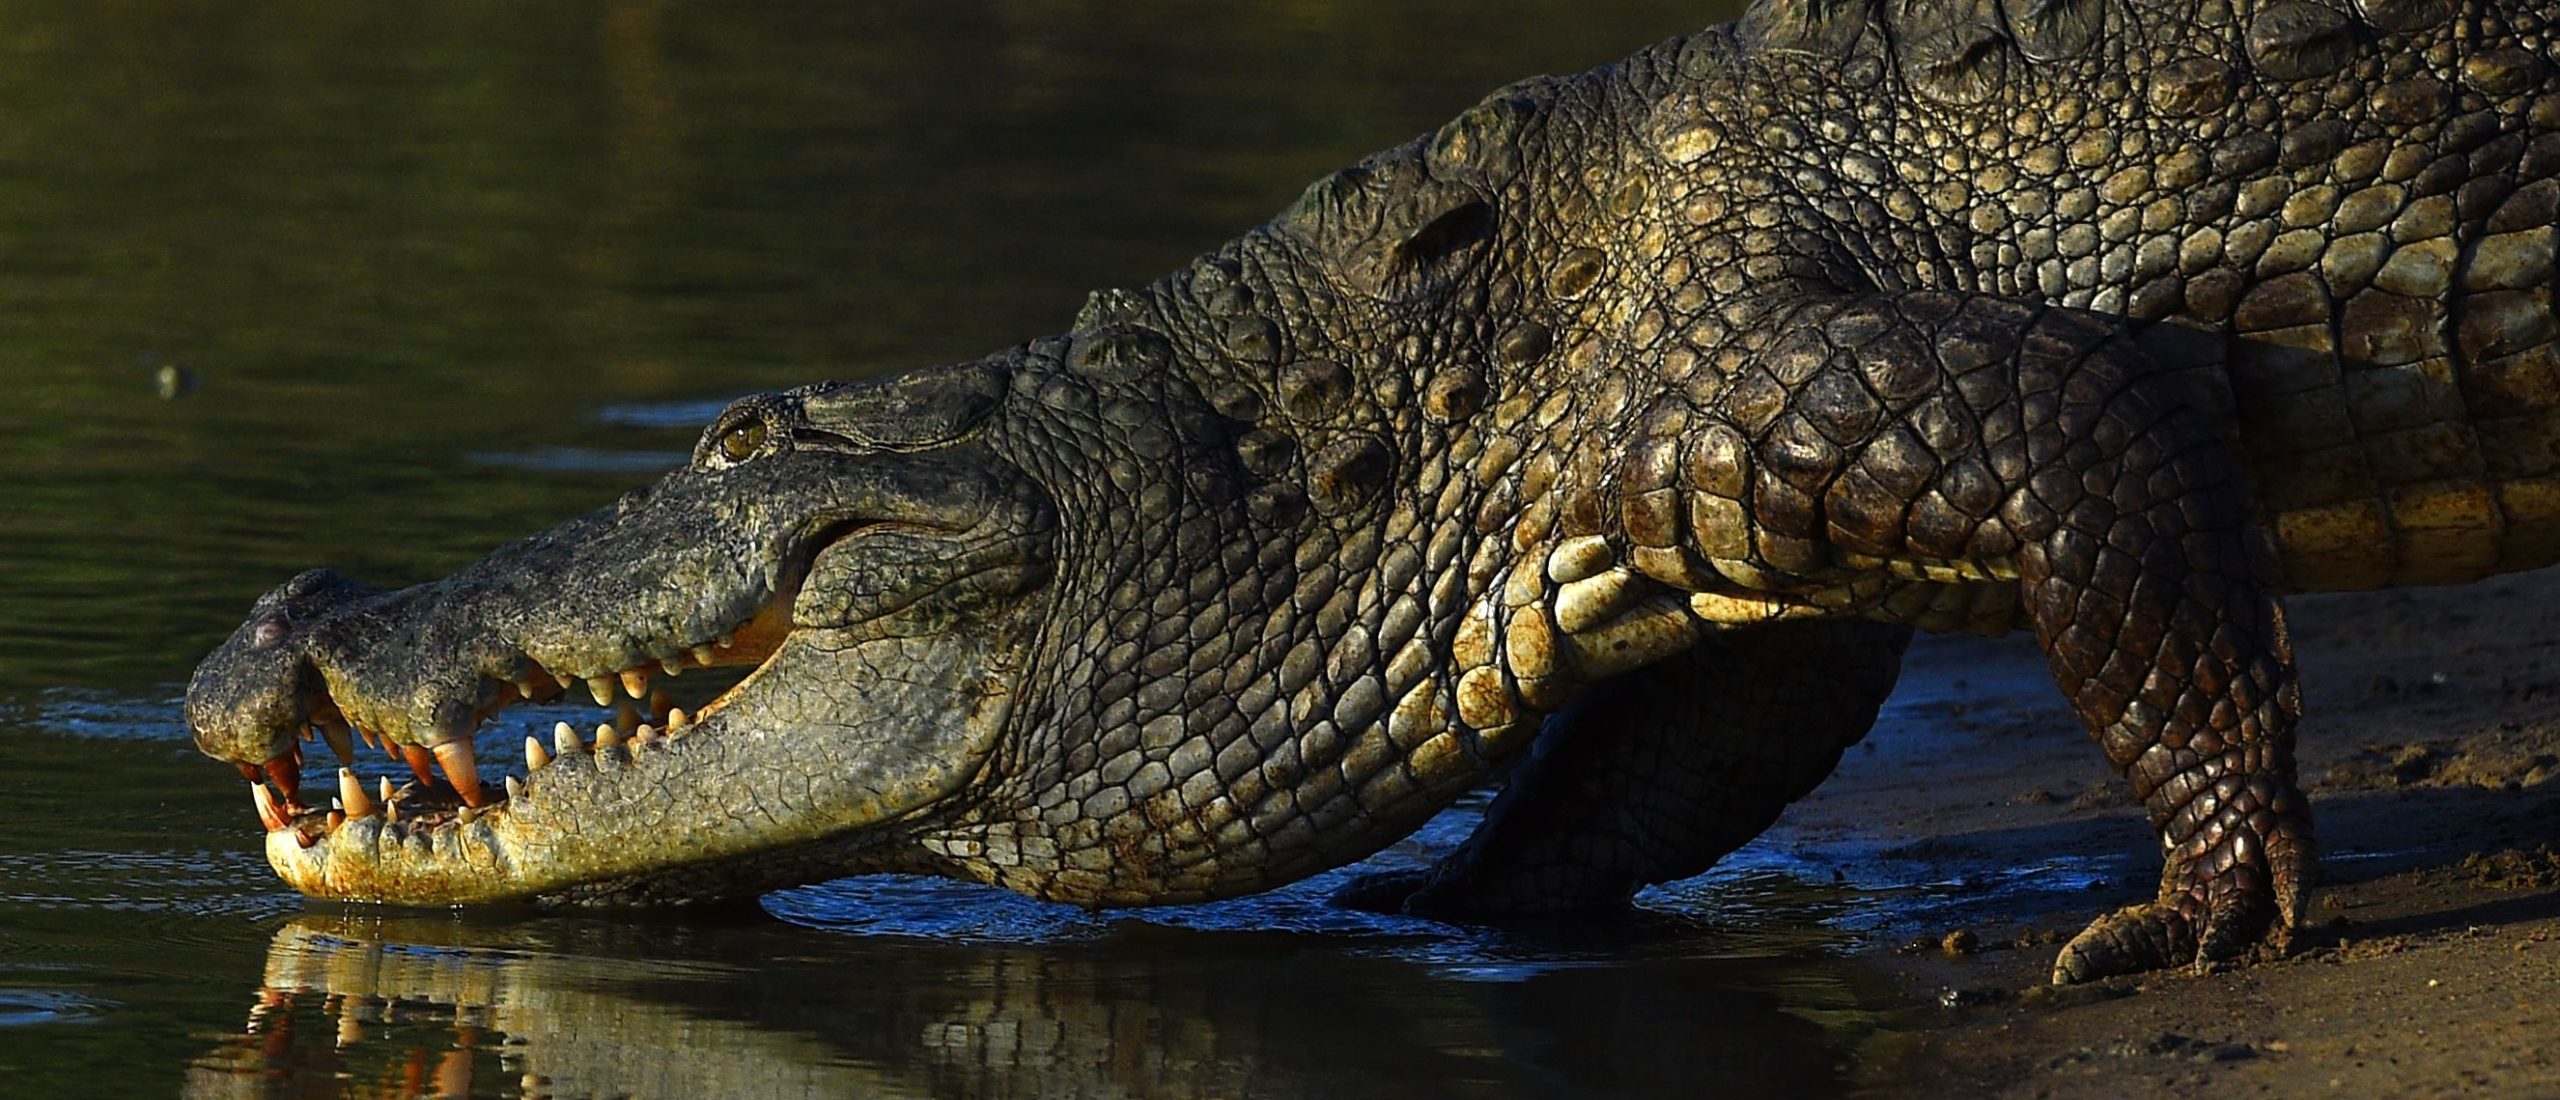 teenager-goes-whitewater-rafting-gets-brutally-mauled-by-crocodile